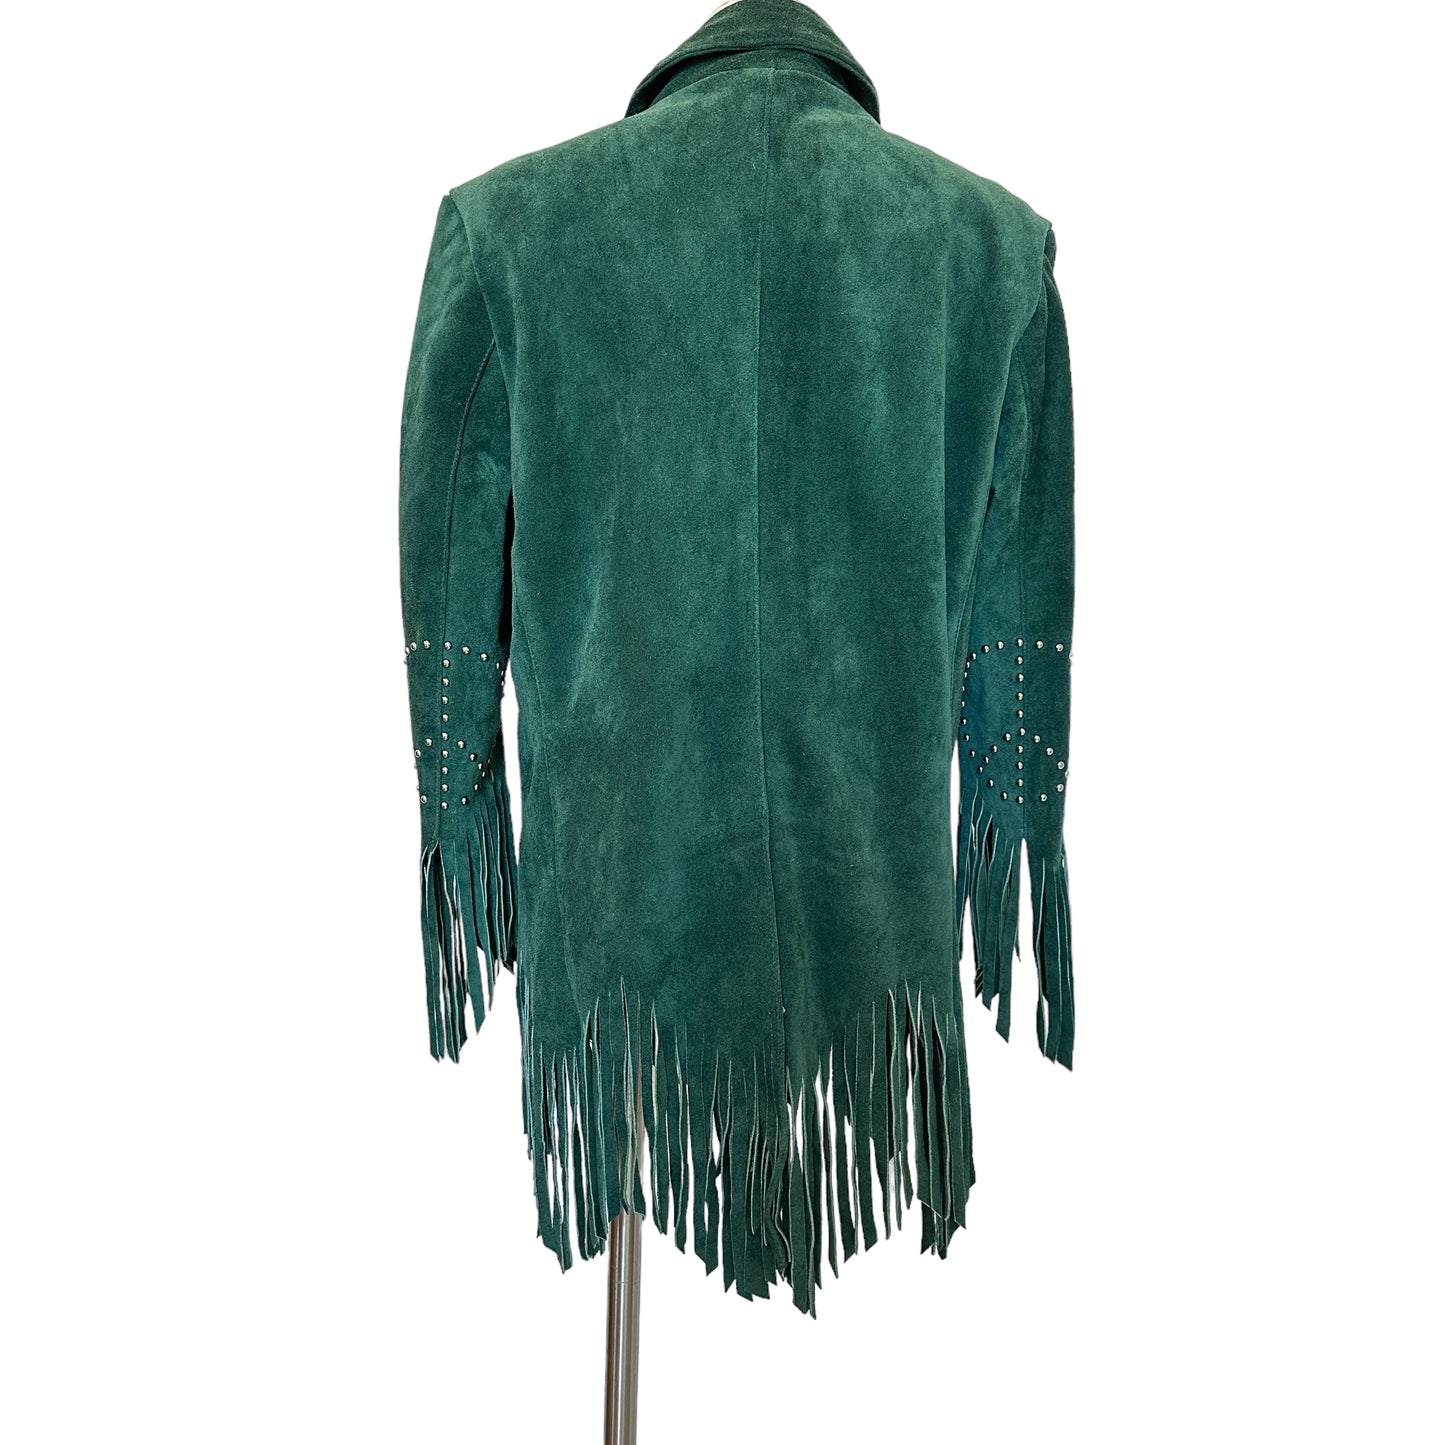 Green Suede Peace & Love Jacket - S